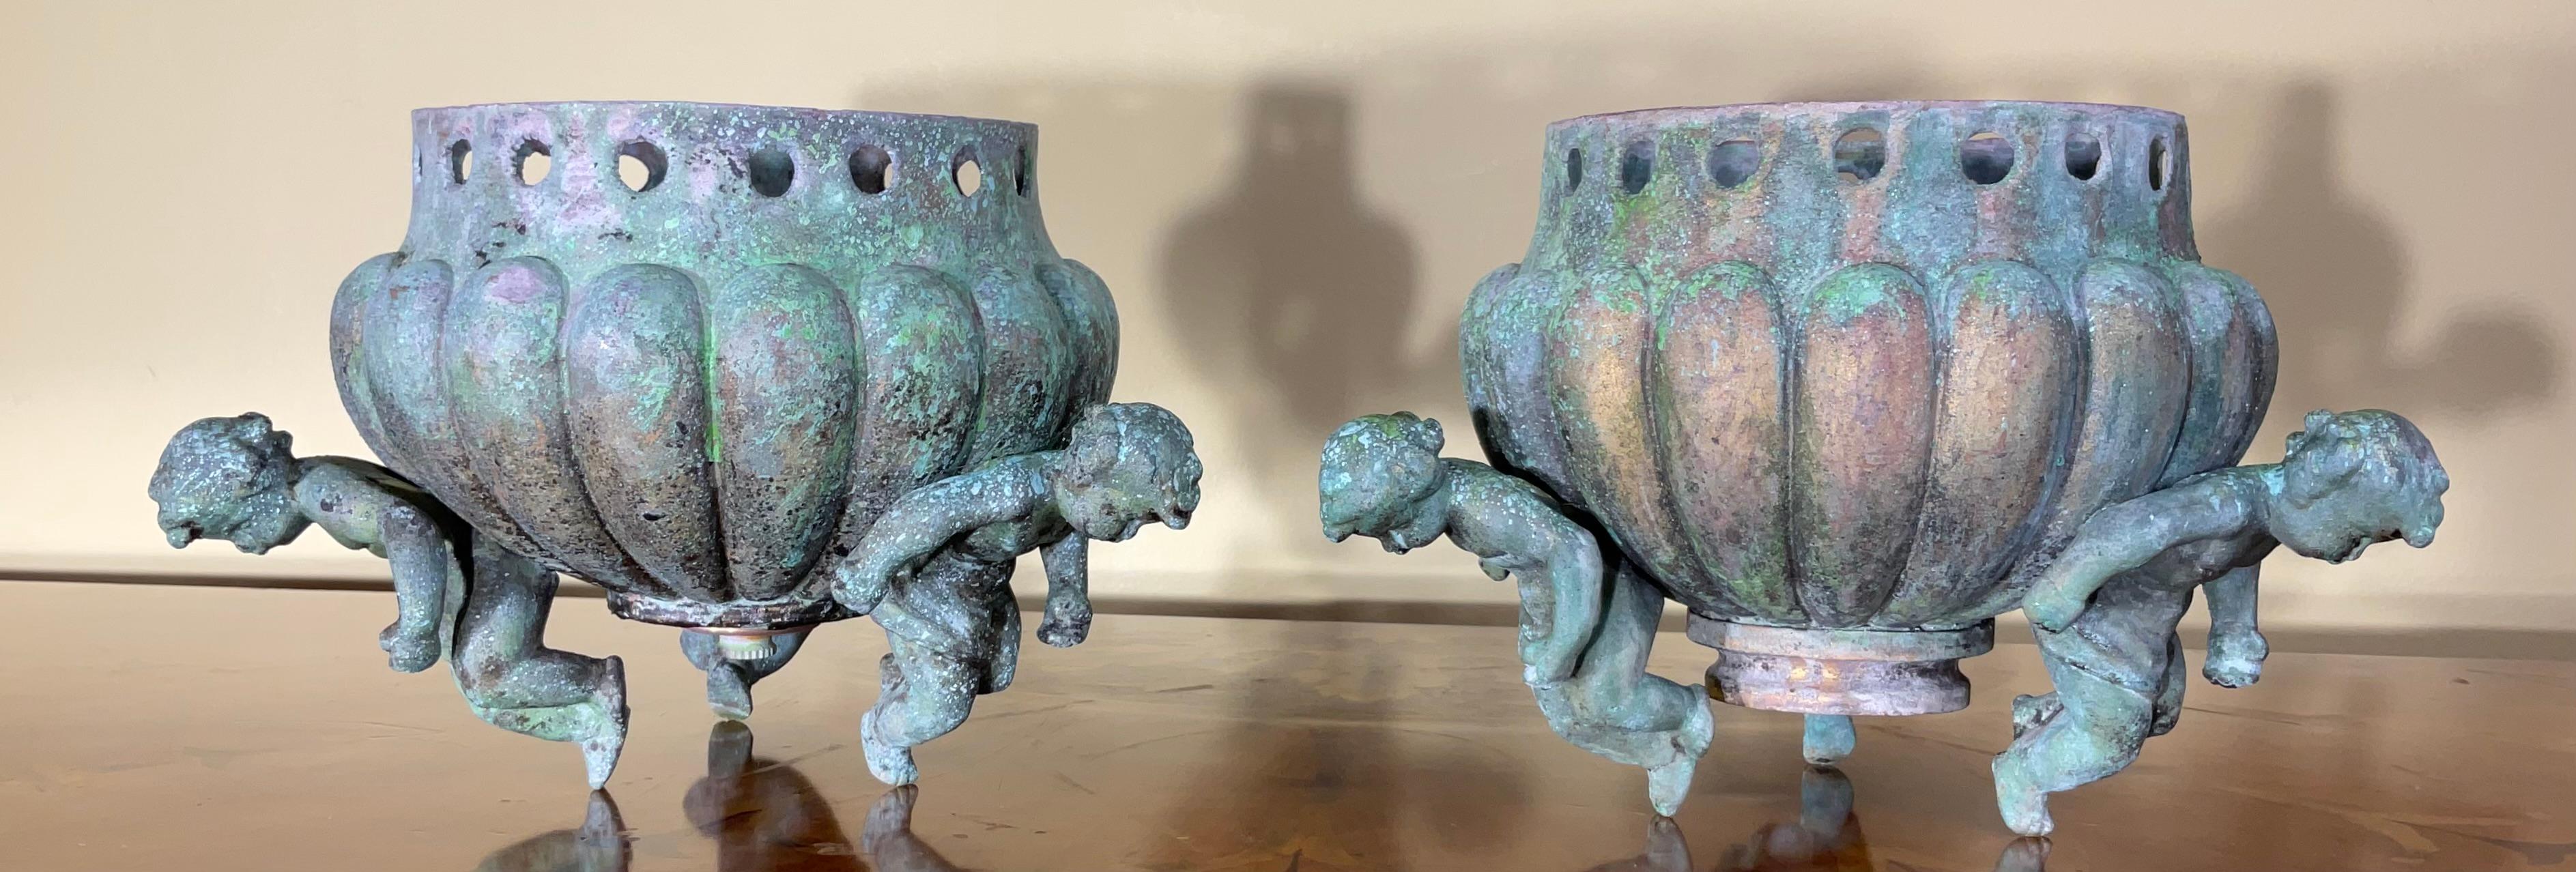 Exceptional antique pair of bronze architectural element salvage ,used as decorative object of art. Beautiful oxidized green-turquoise patina, three bronze cherubs around each of the vessel , one of a kind object of art for display.